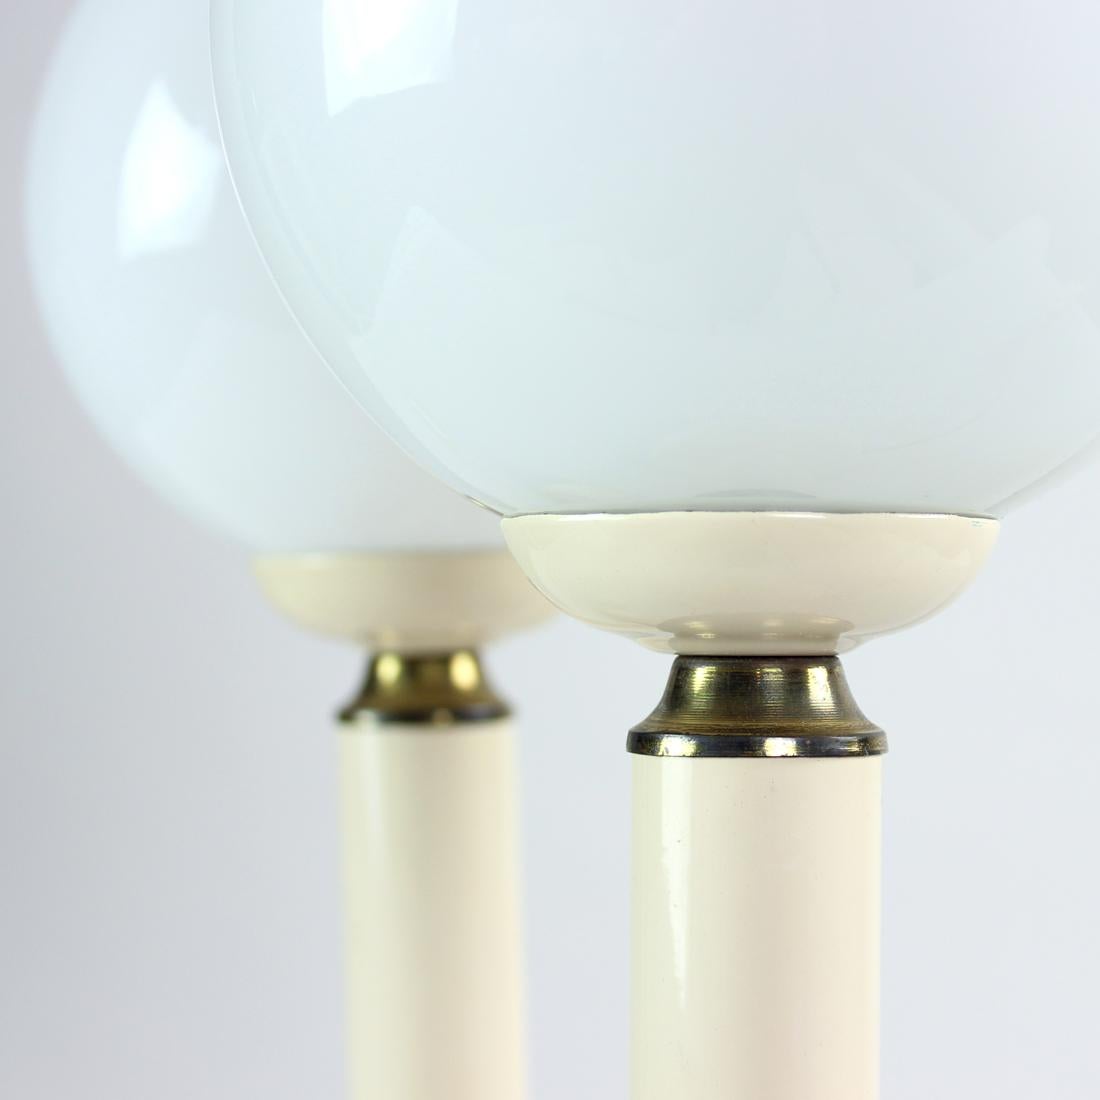 Pair of Opaline Glass Lamps, Czechoslovakia, 1970s For Sale 1